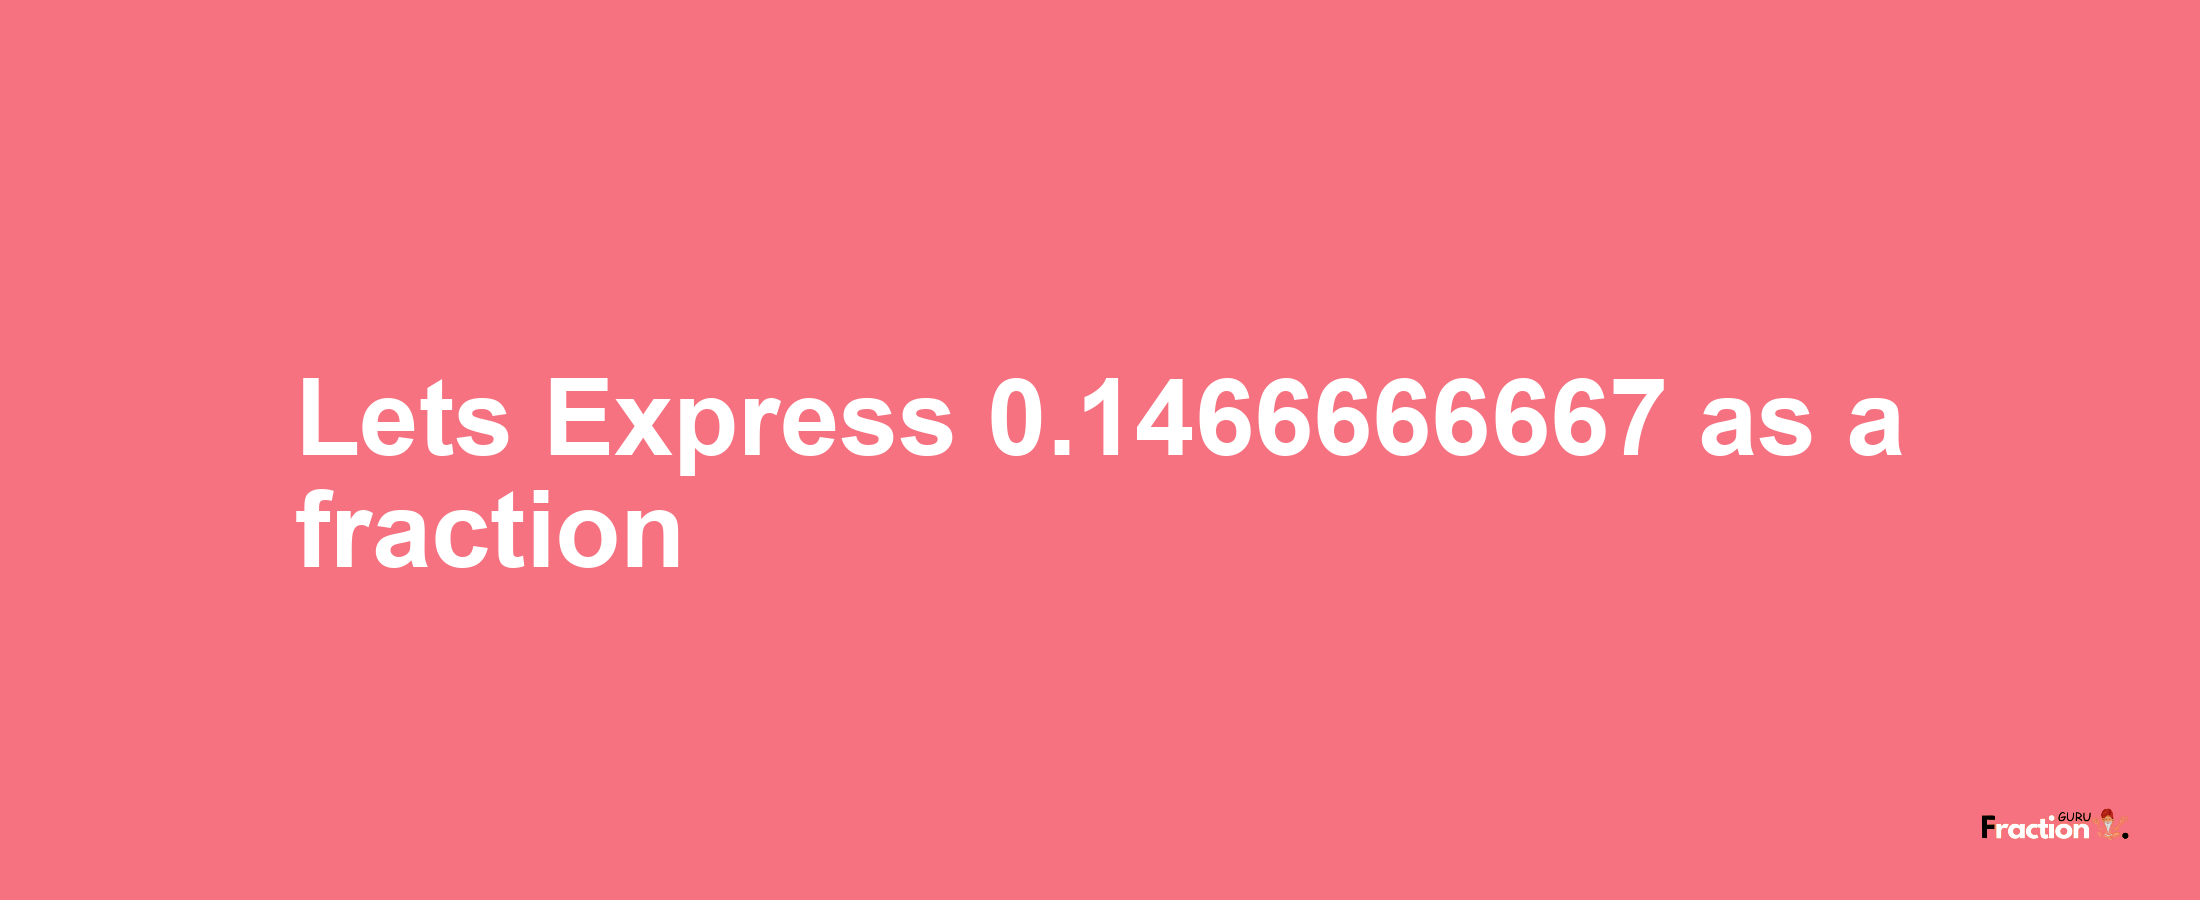 Lets Express 0.1466666667 as afraction